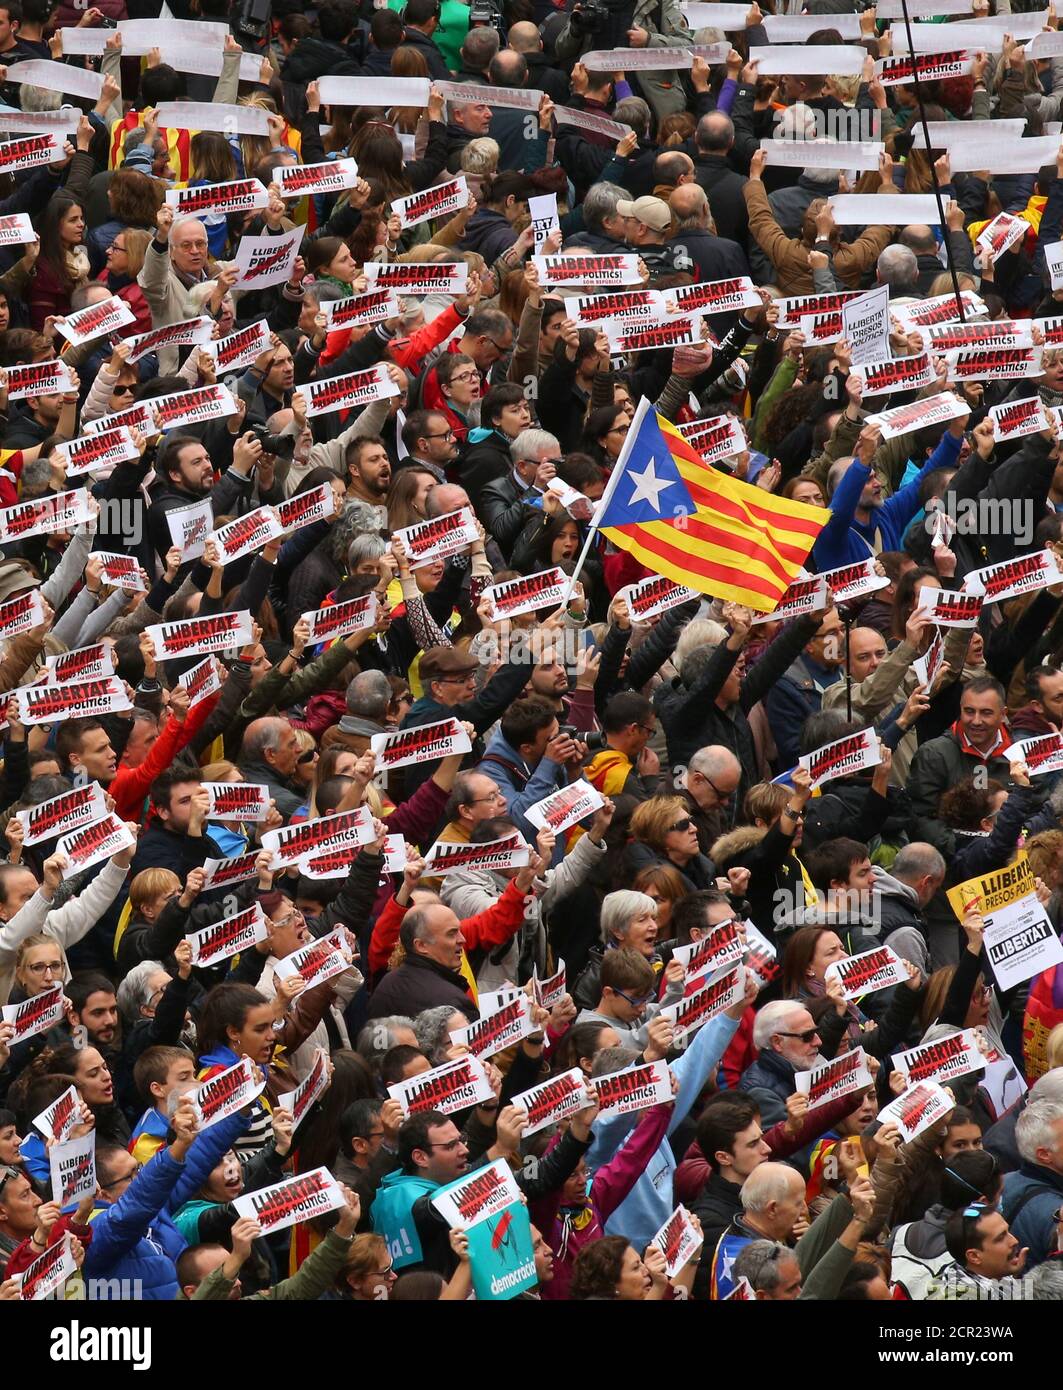 Protesters hold banners reading 'Freedom Political Prisoners, We are Republic' as they gather in Sant Jaume square at a demonstration during a partial regional strike in Barcelona, Spain, November 8, 2017.  REUTERS/Albert Gea Stock Photo